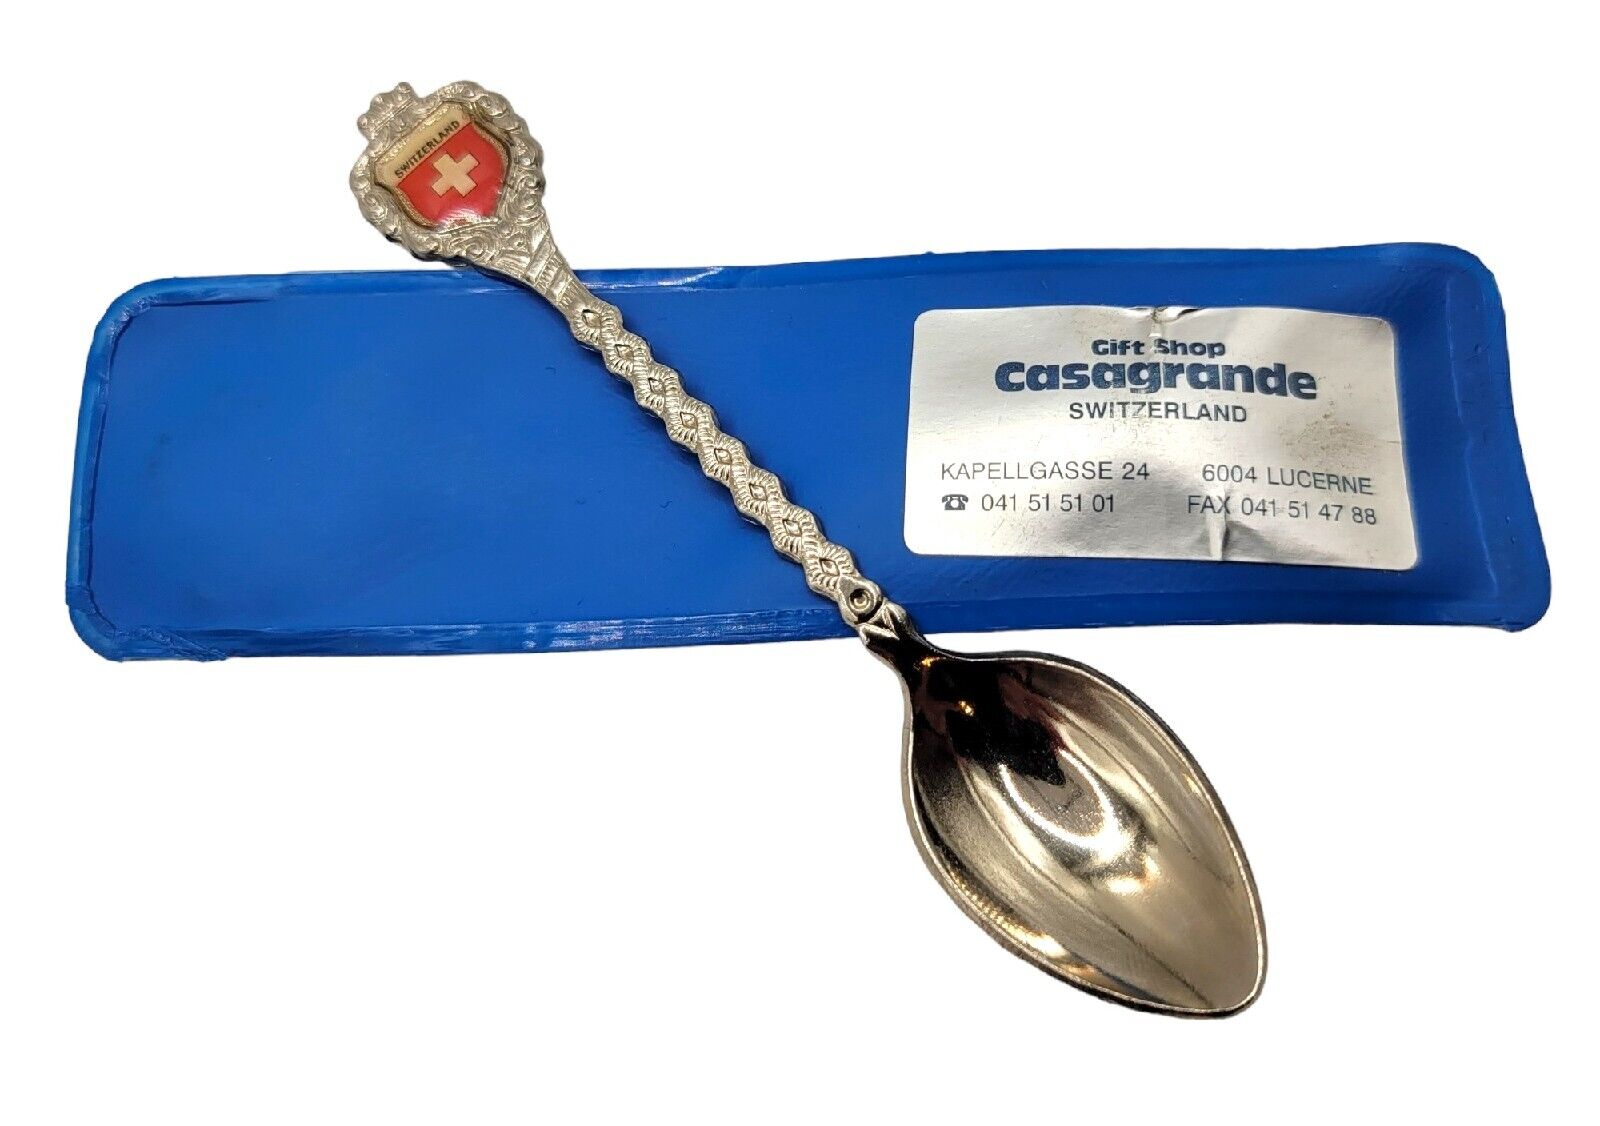 Switzerland Silver Plated New Collectible Spoon In Case 4.5